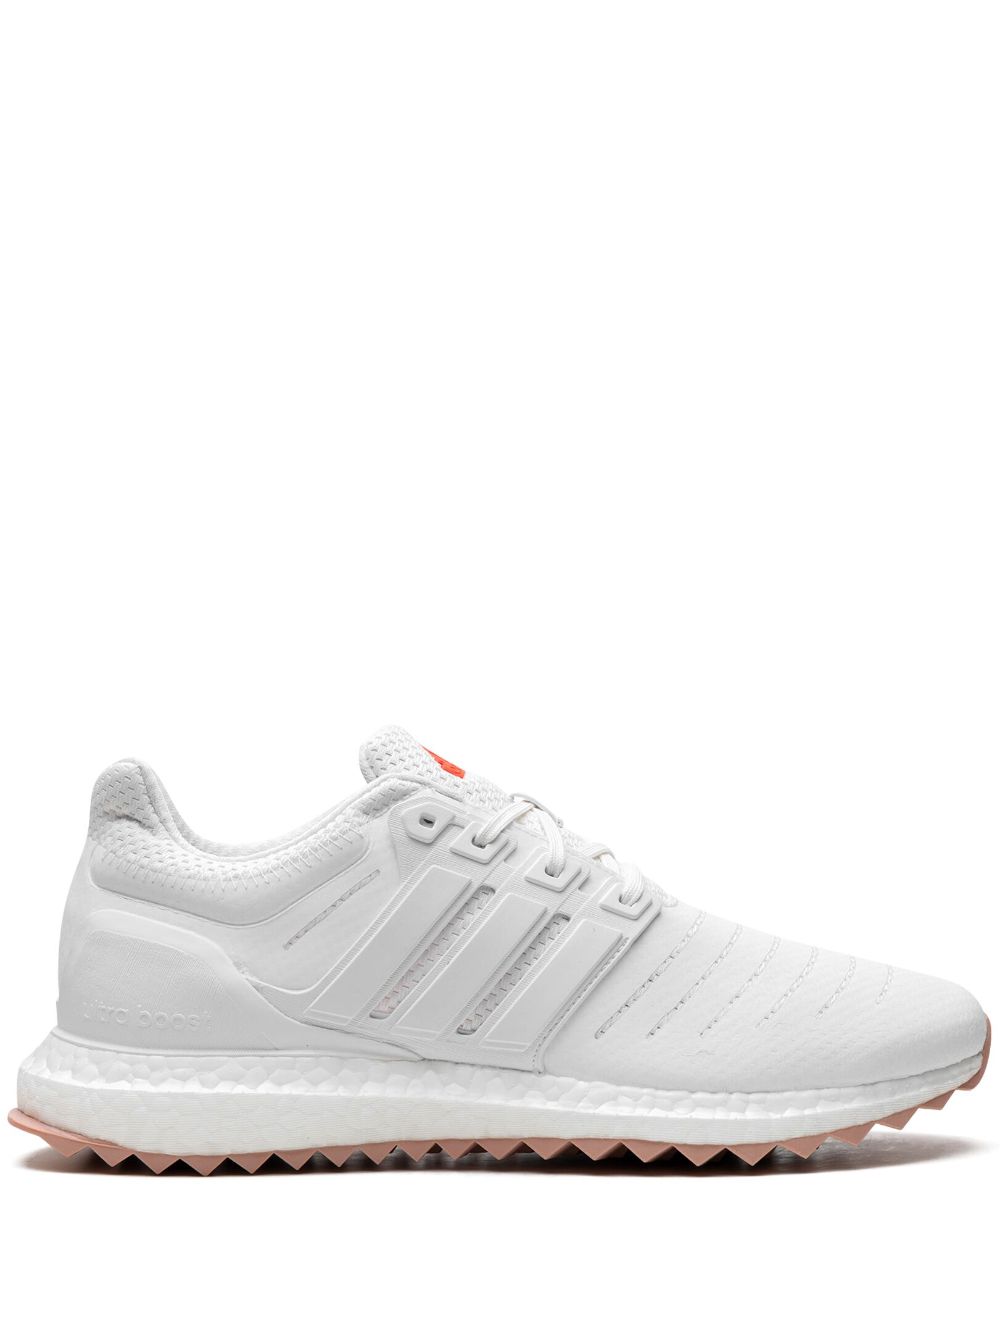 Adidas Originals Ultraboost Dna Xxii "non Dyed Bright Red" Sneakers In White